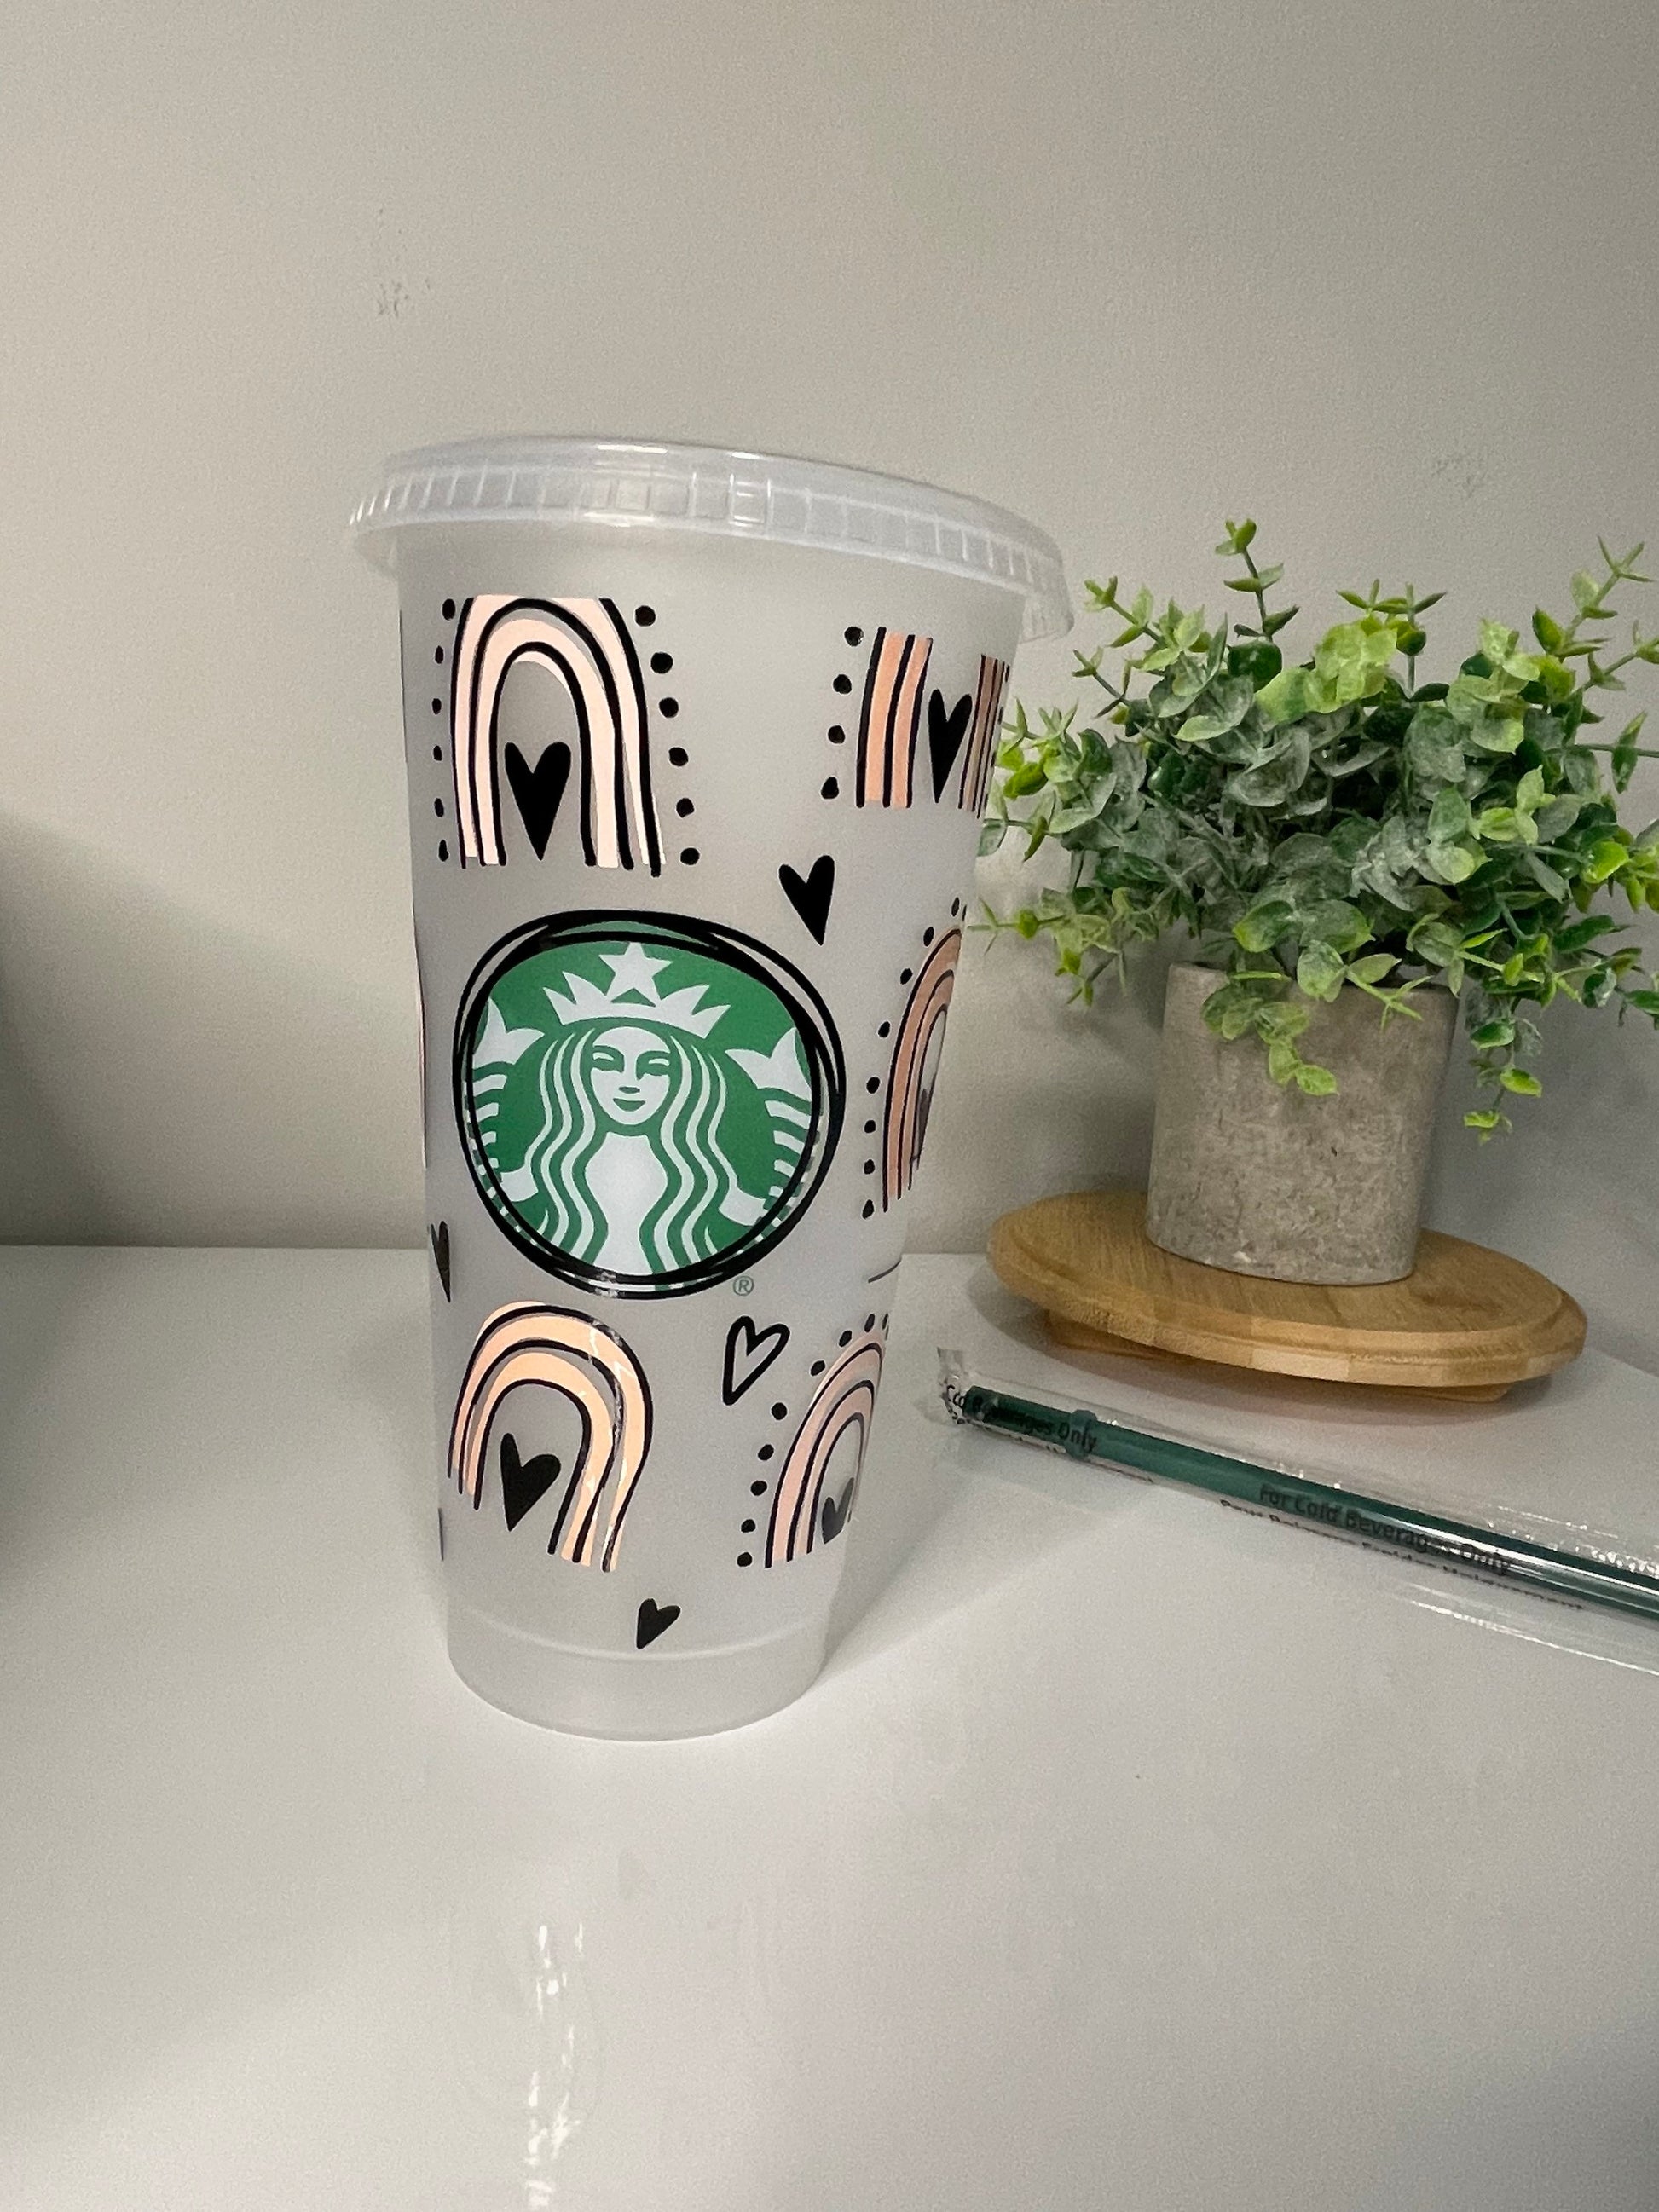 Starbucks custom cold cup with ghost design